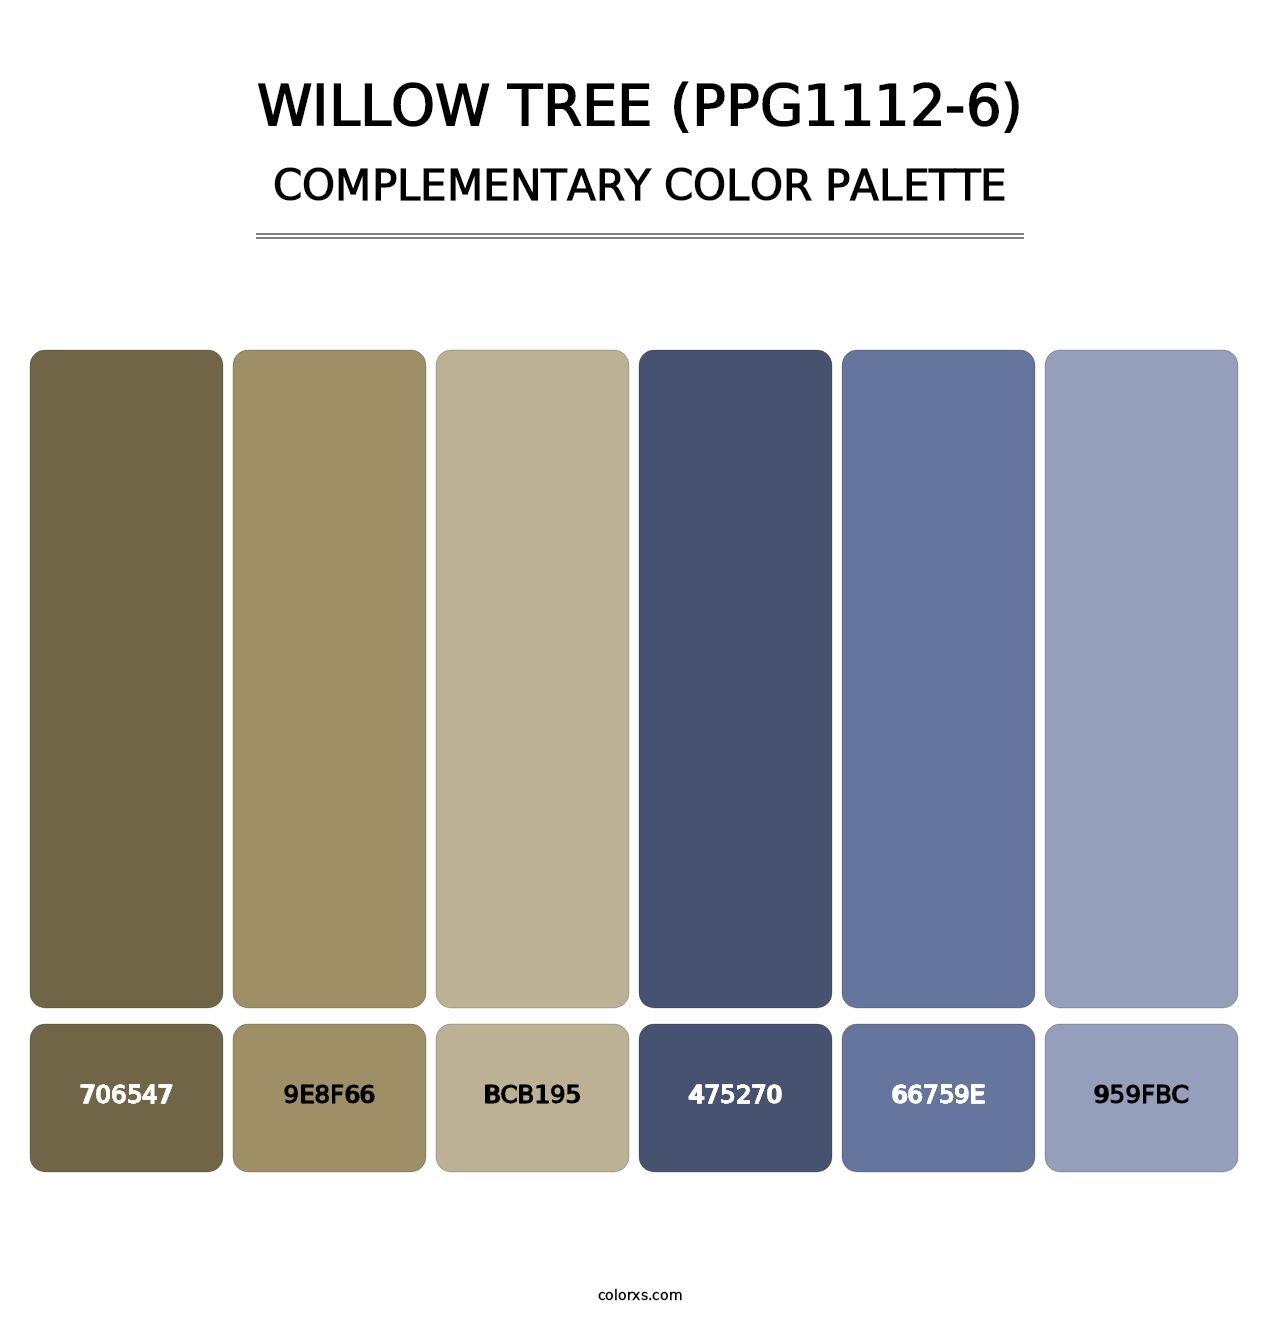 Willow Tree (PPG1112-6) - Complementary Color Palette